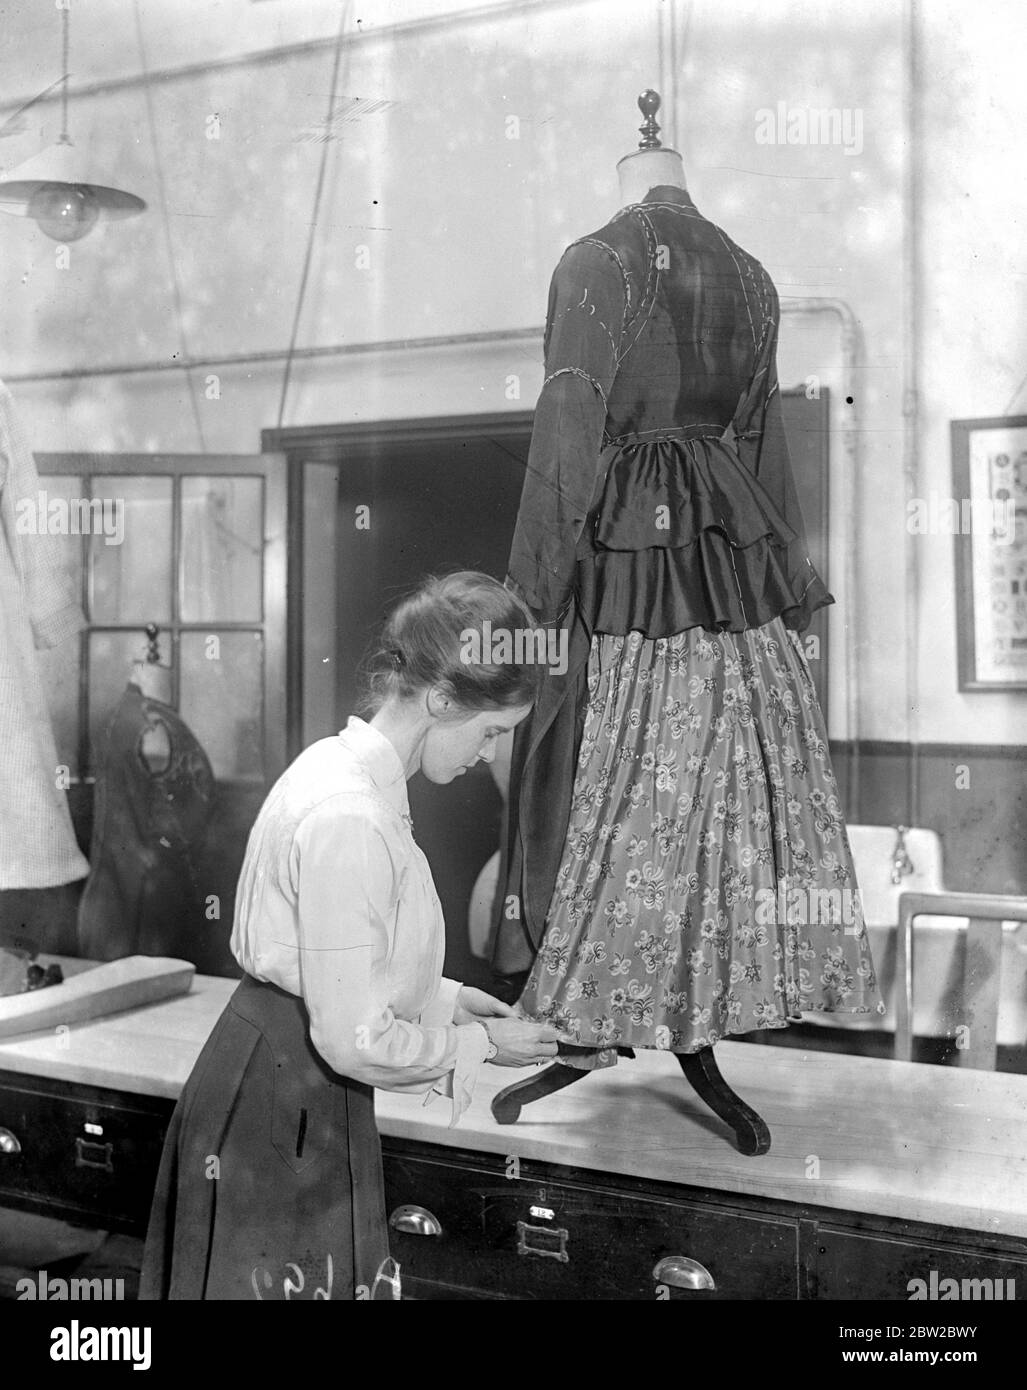 The Northern Polytechnic has started classes to enable women to convert out of date costumes into fashionable creations. There by enabling them to dress fashionable and economise at the same time. Costume made form an old cape, a skirt and a small piece of new material. 1914 - 1918 Stock Photo